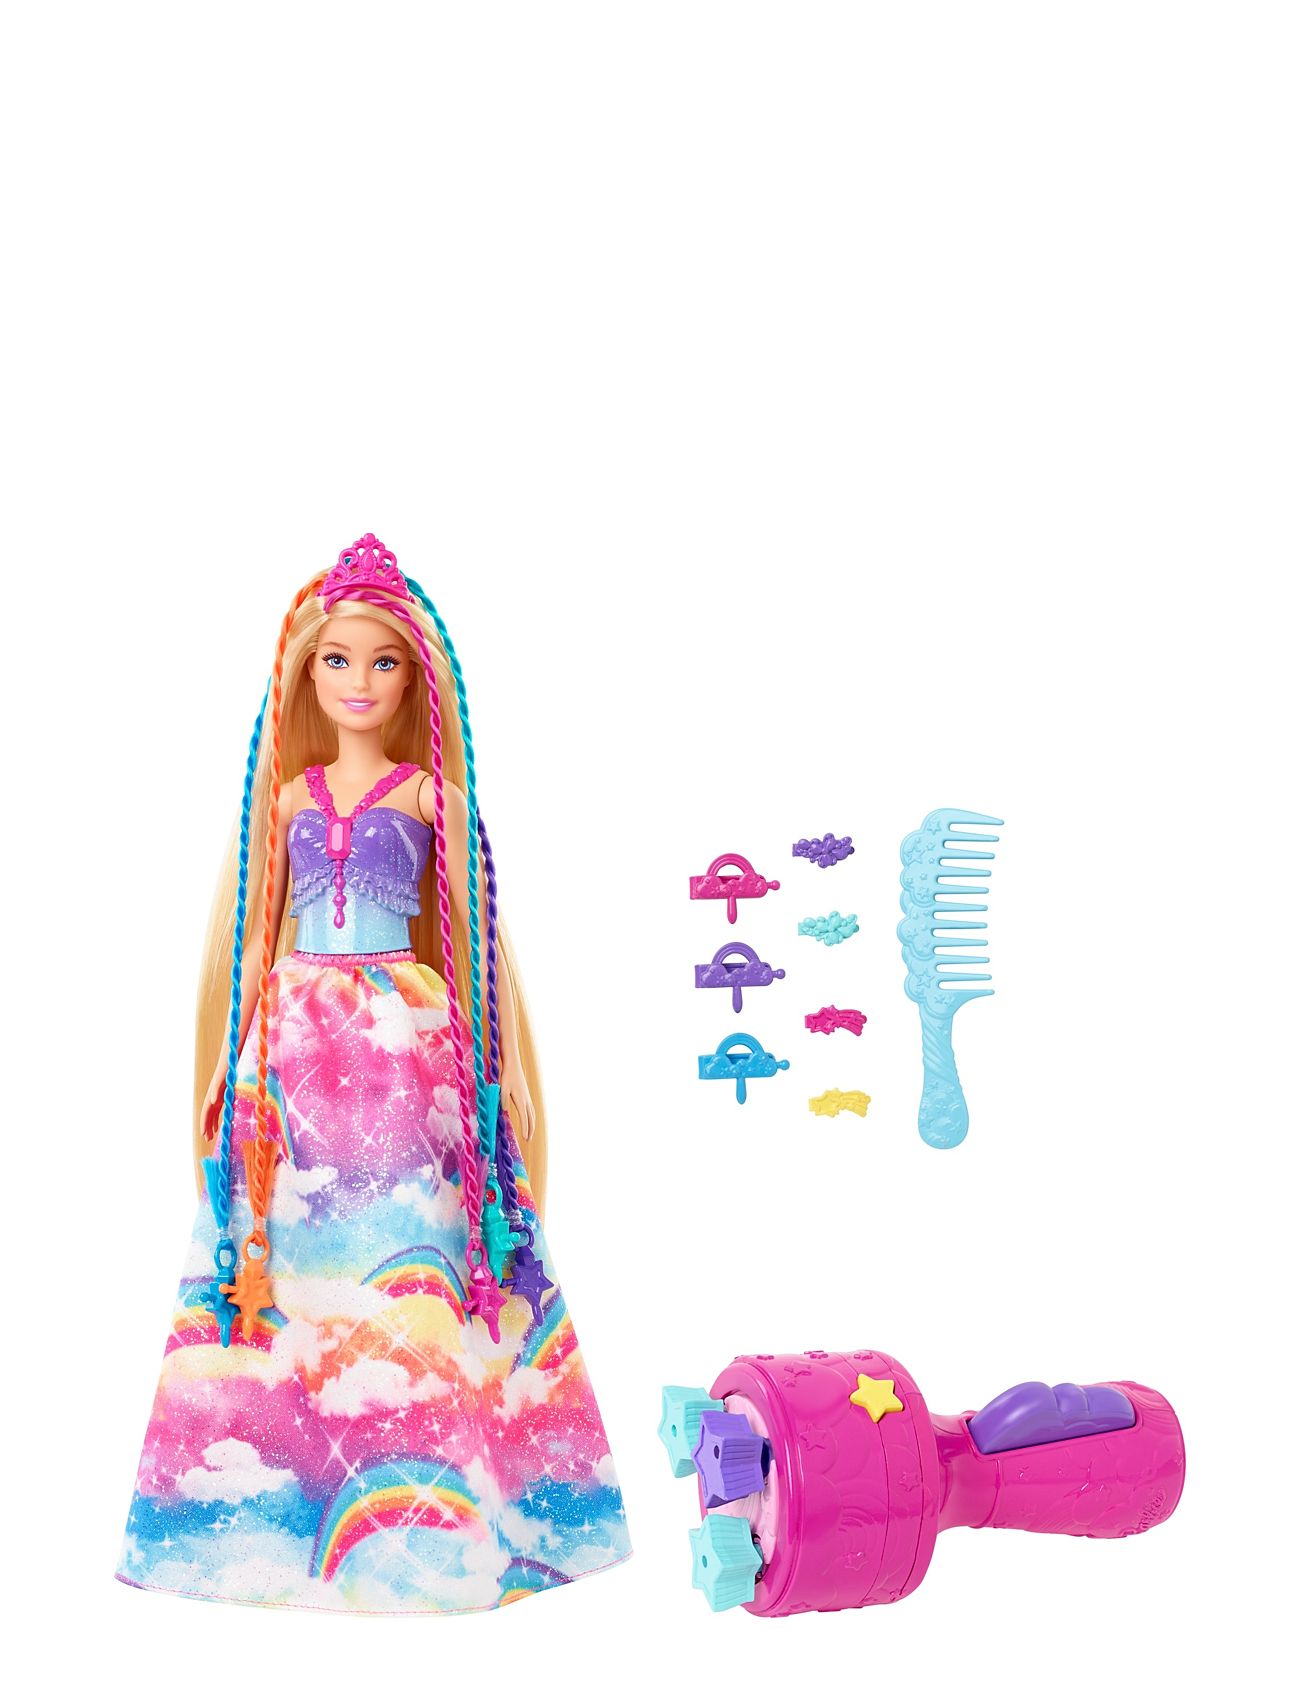 Dreamtopia Twist 'N Style Doll And Accessories Toys Dolls & Accessories Dolls Multi/patterned Barbie